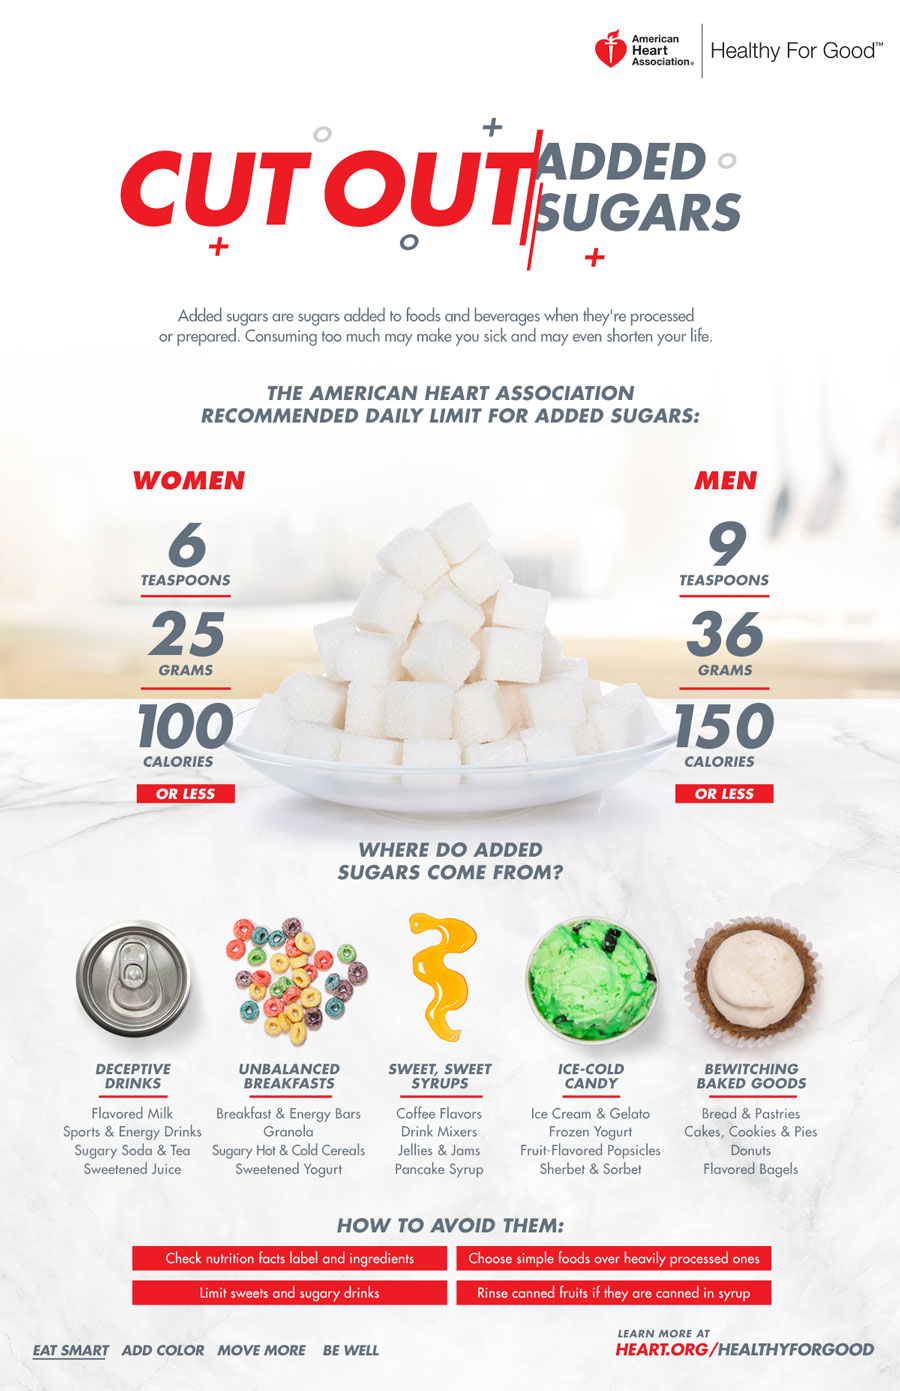 American Heart Association Cut Out Added Sugars Infographic